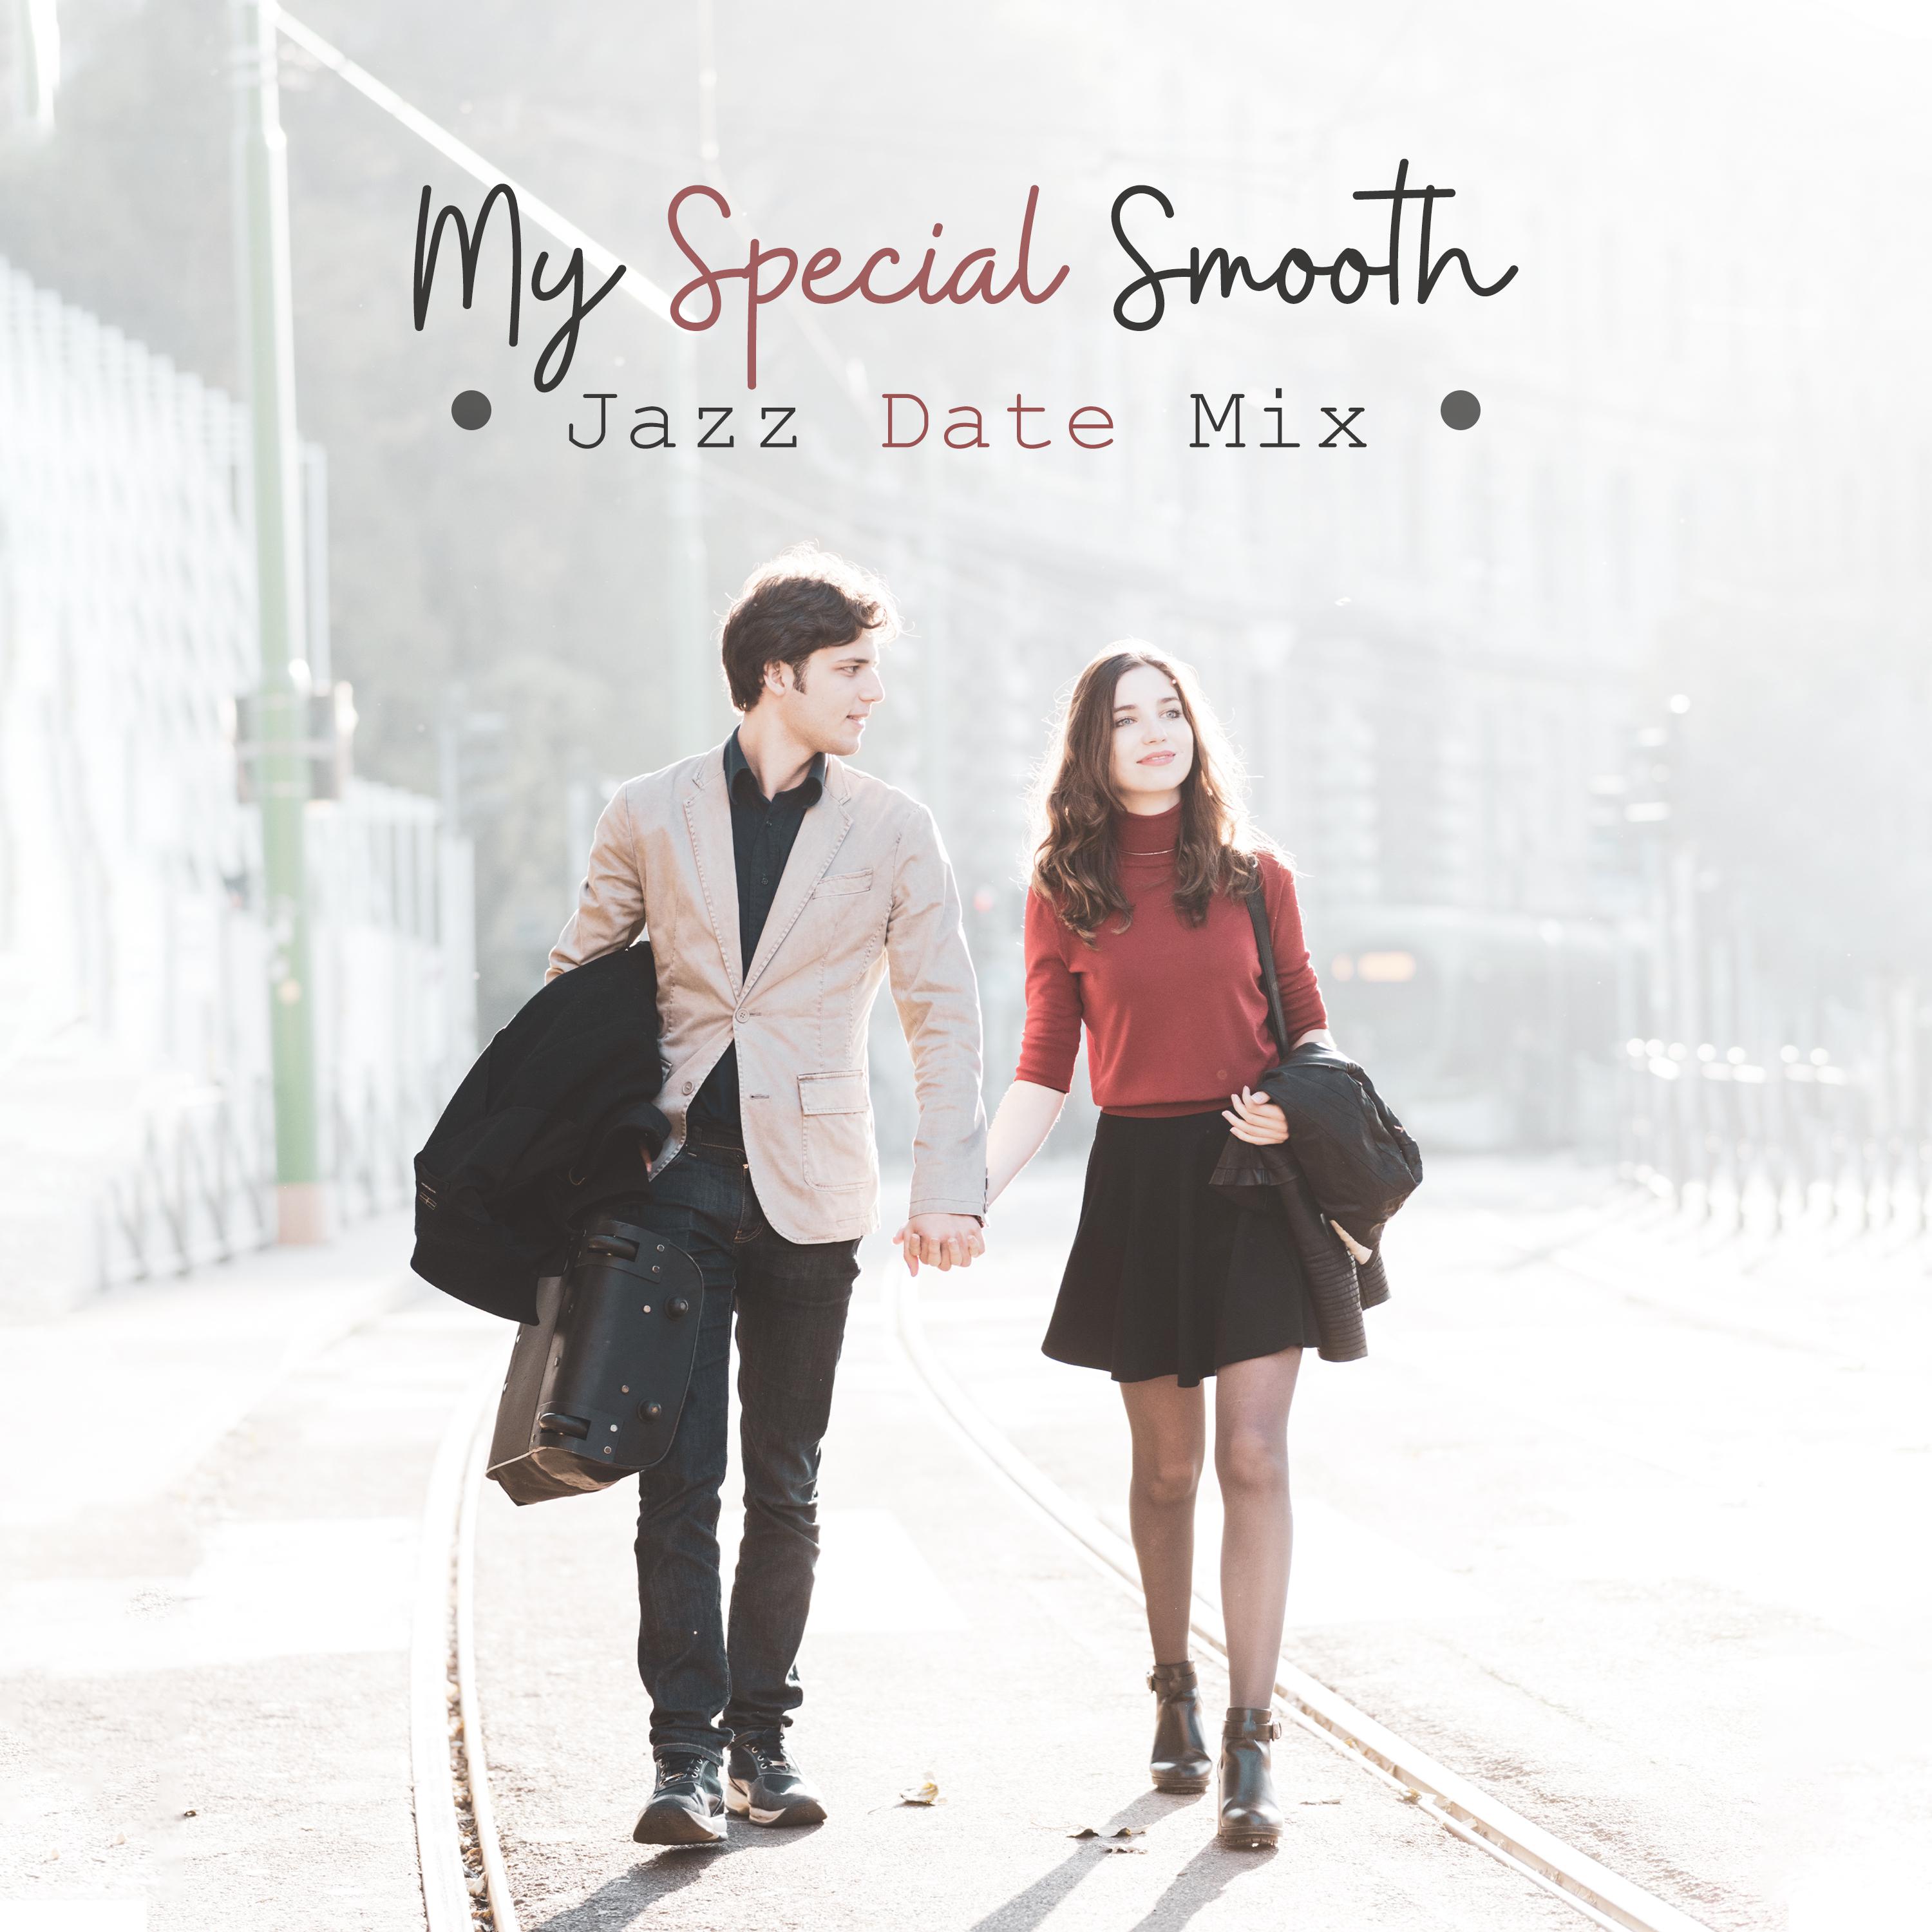 My Special Smooth Jazz Date Mix: 2019 Instrumental Soft Jazz Music for Date with Love, Romantic Walk & Dinner Background Songs, Vintage Sounds of Piano